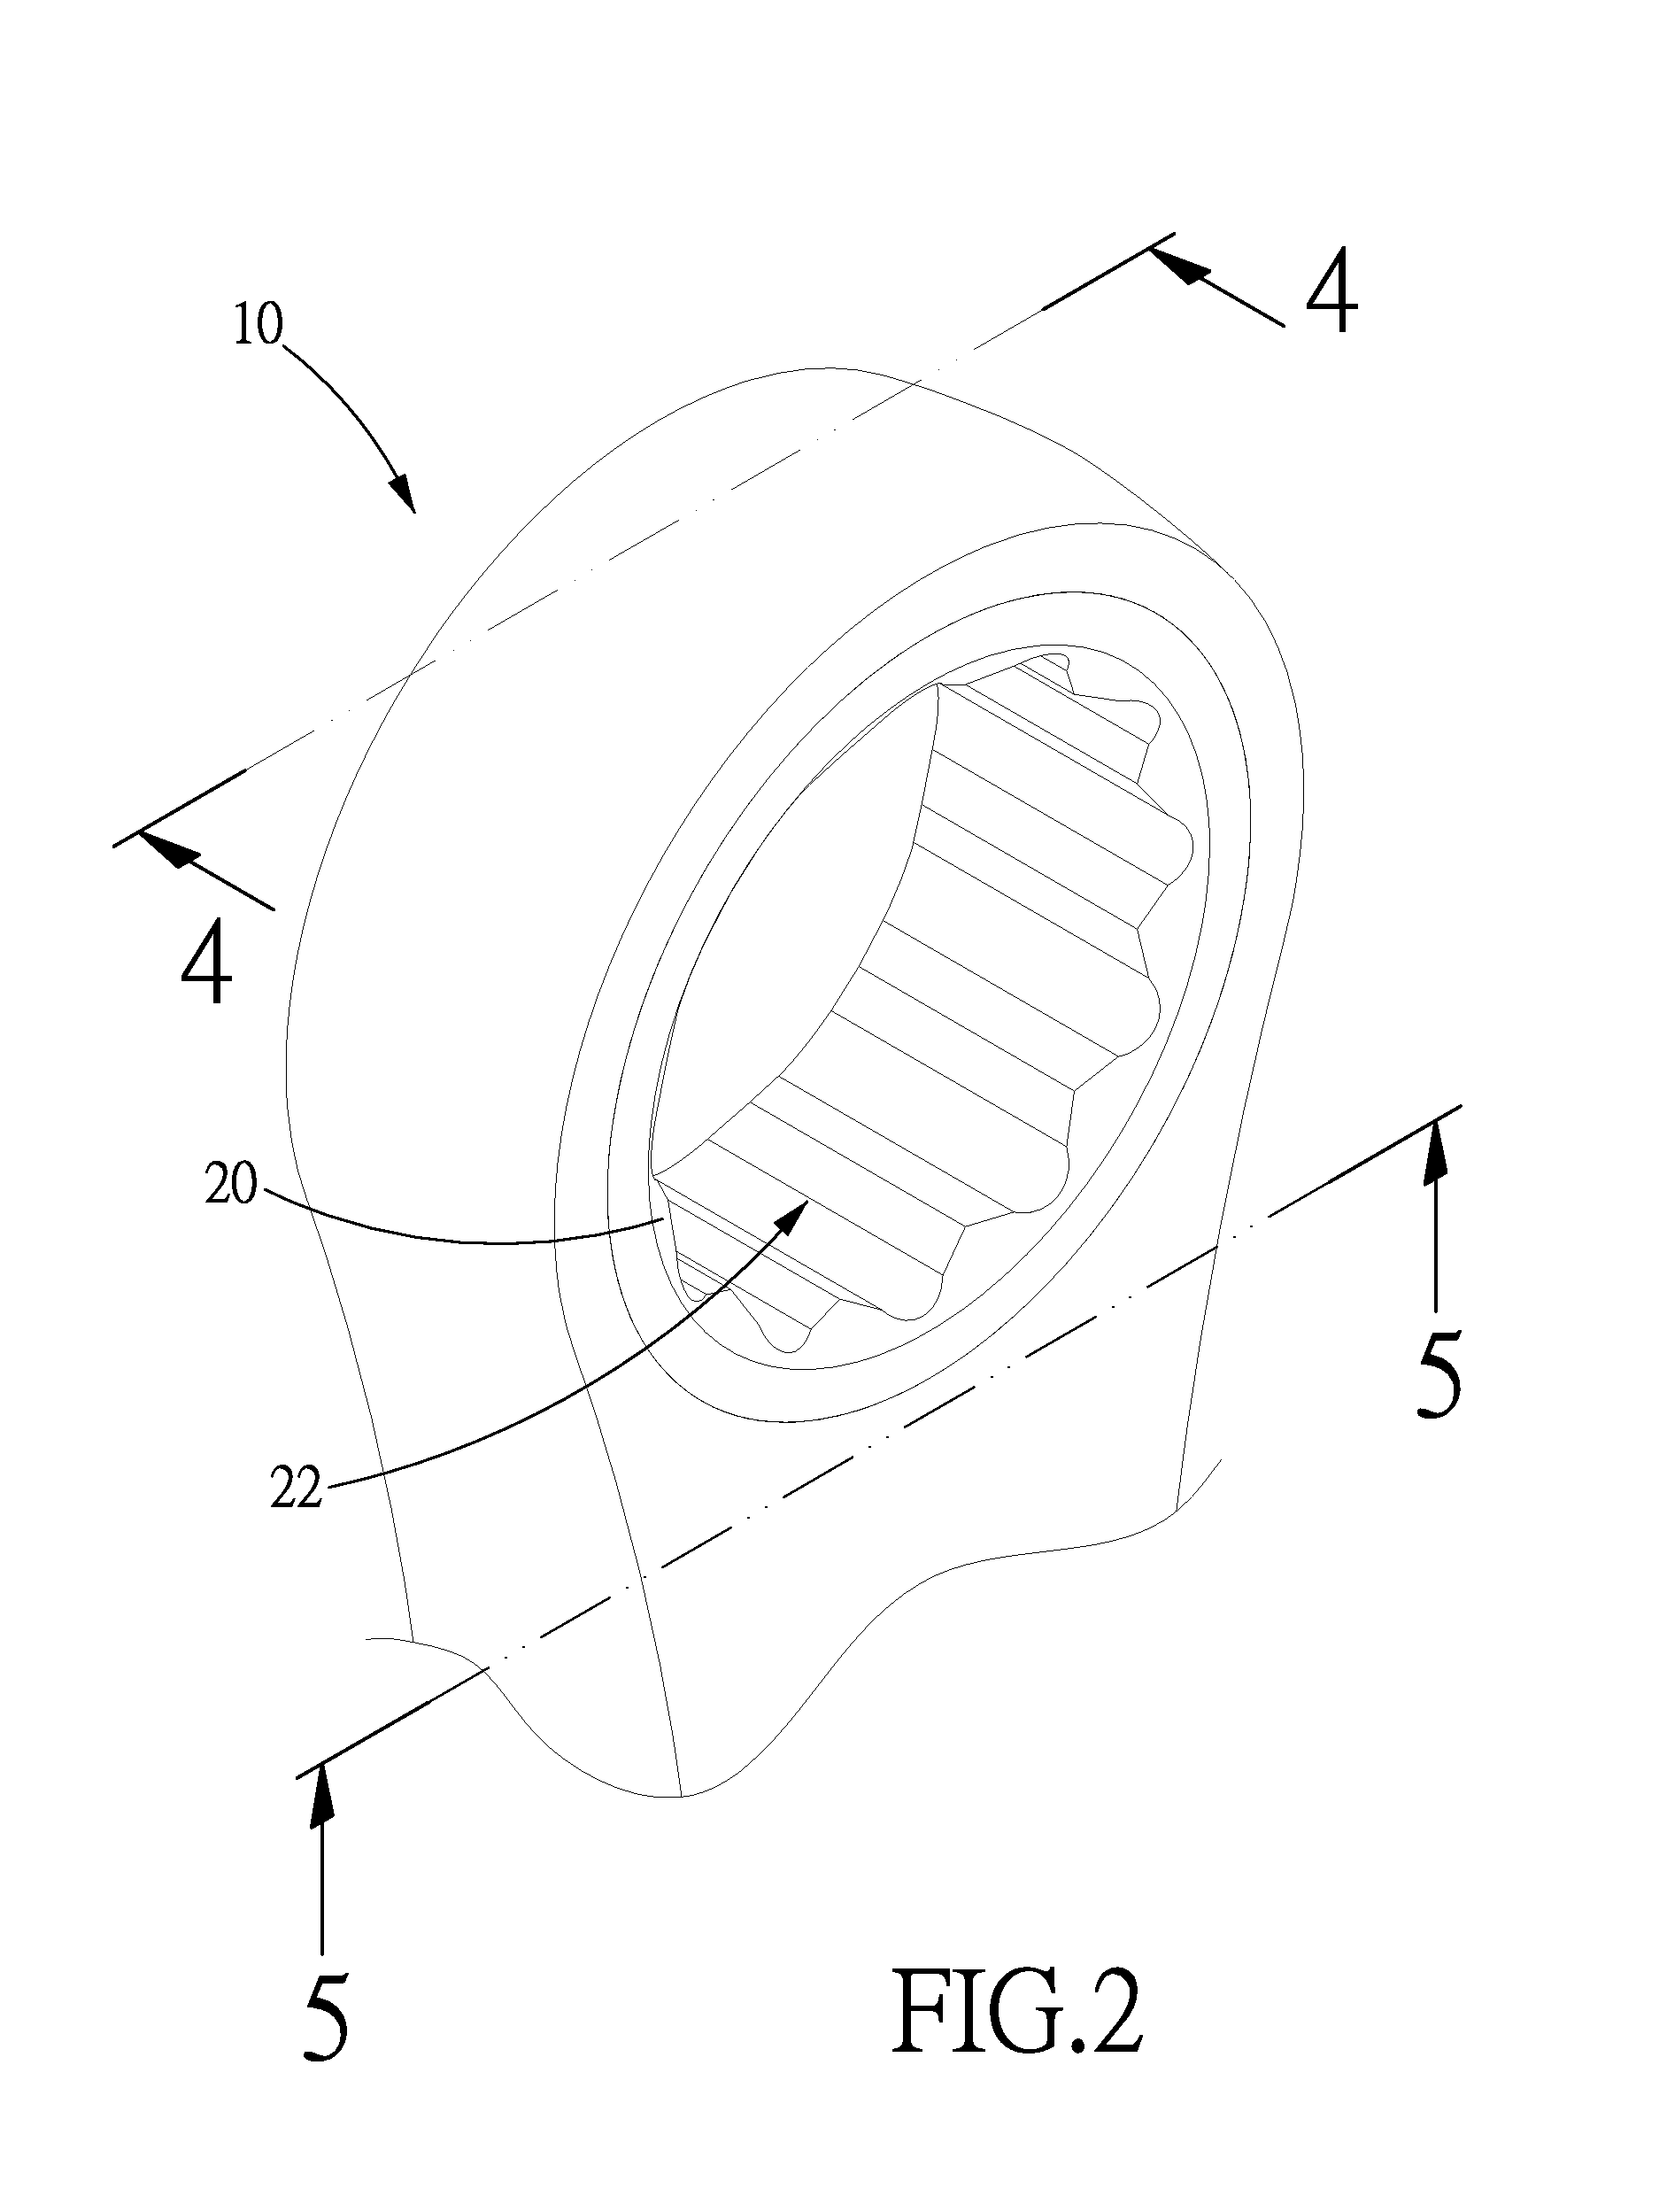 One-way wrench having a catching device with two catches and a catch holder and having differential teeth